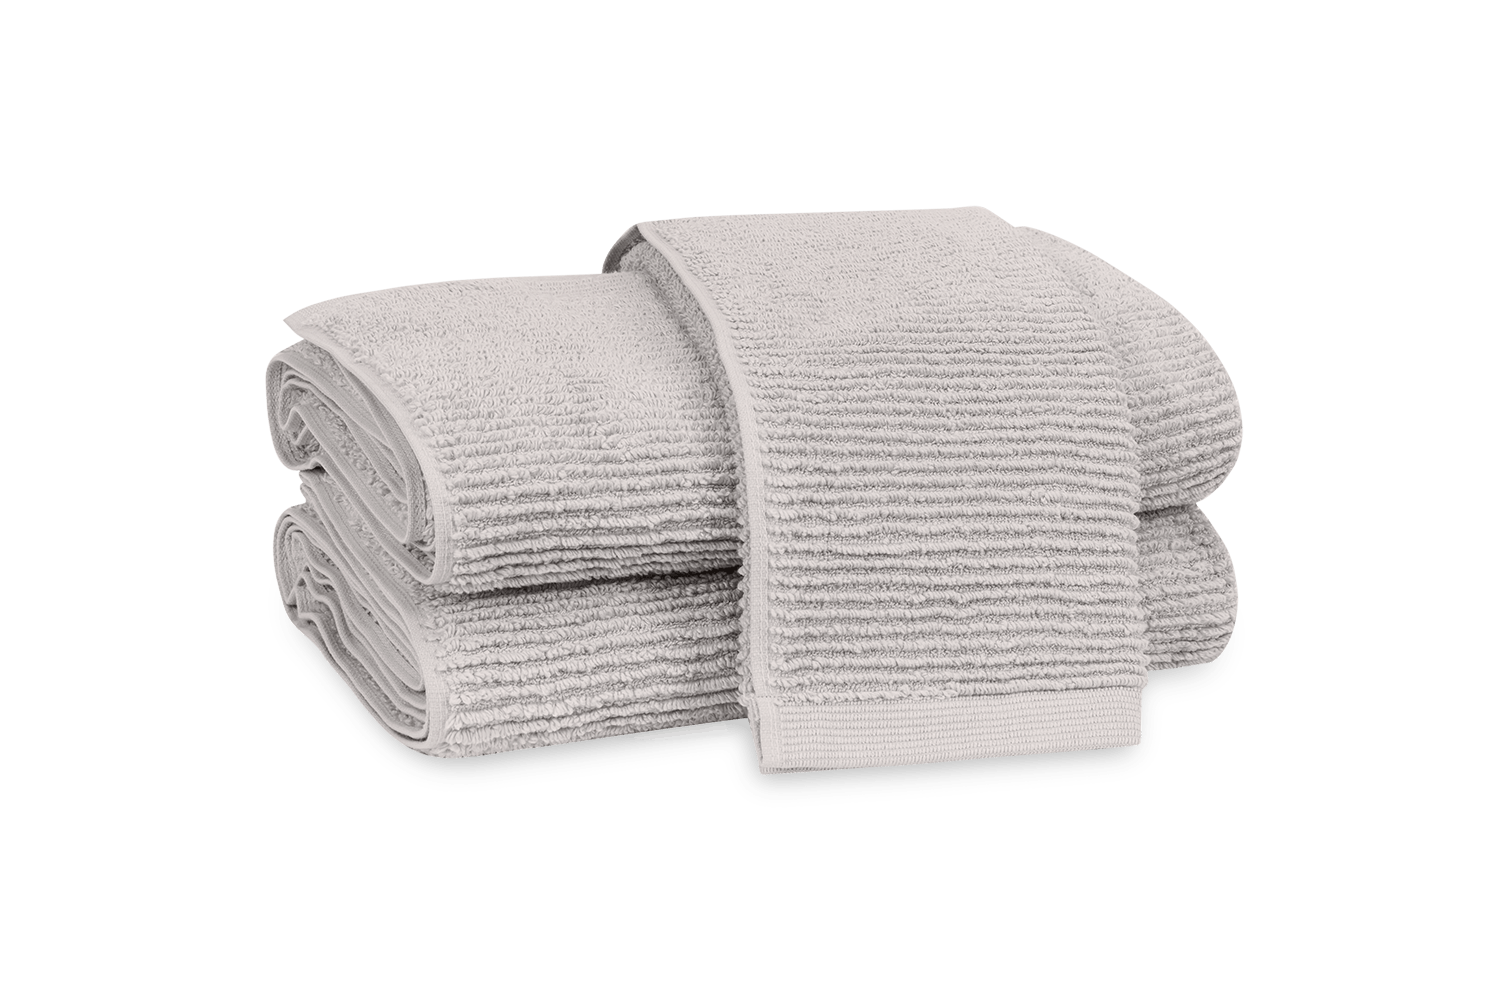 https://matouk-website.imgix.net/spree/products/6290/original/Aman_towels_Cloud2_primary2.png?1586365468